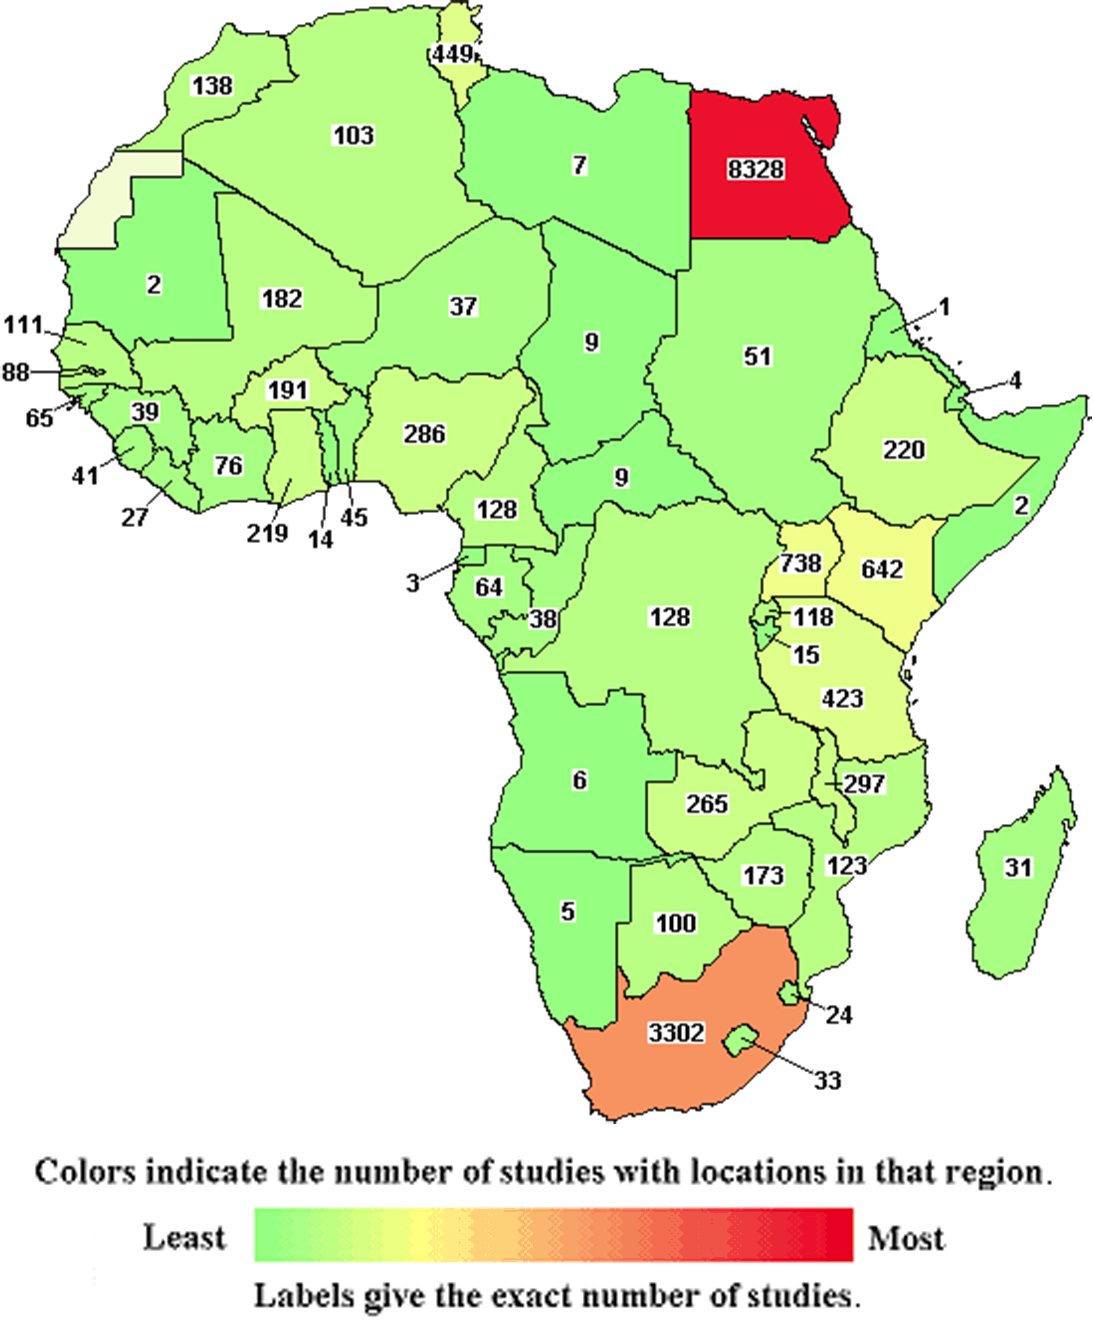 Map of Africa showing number of studies done per region